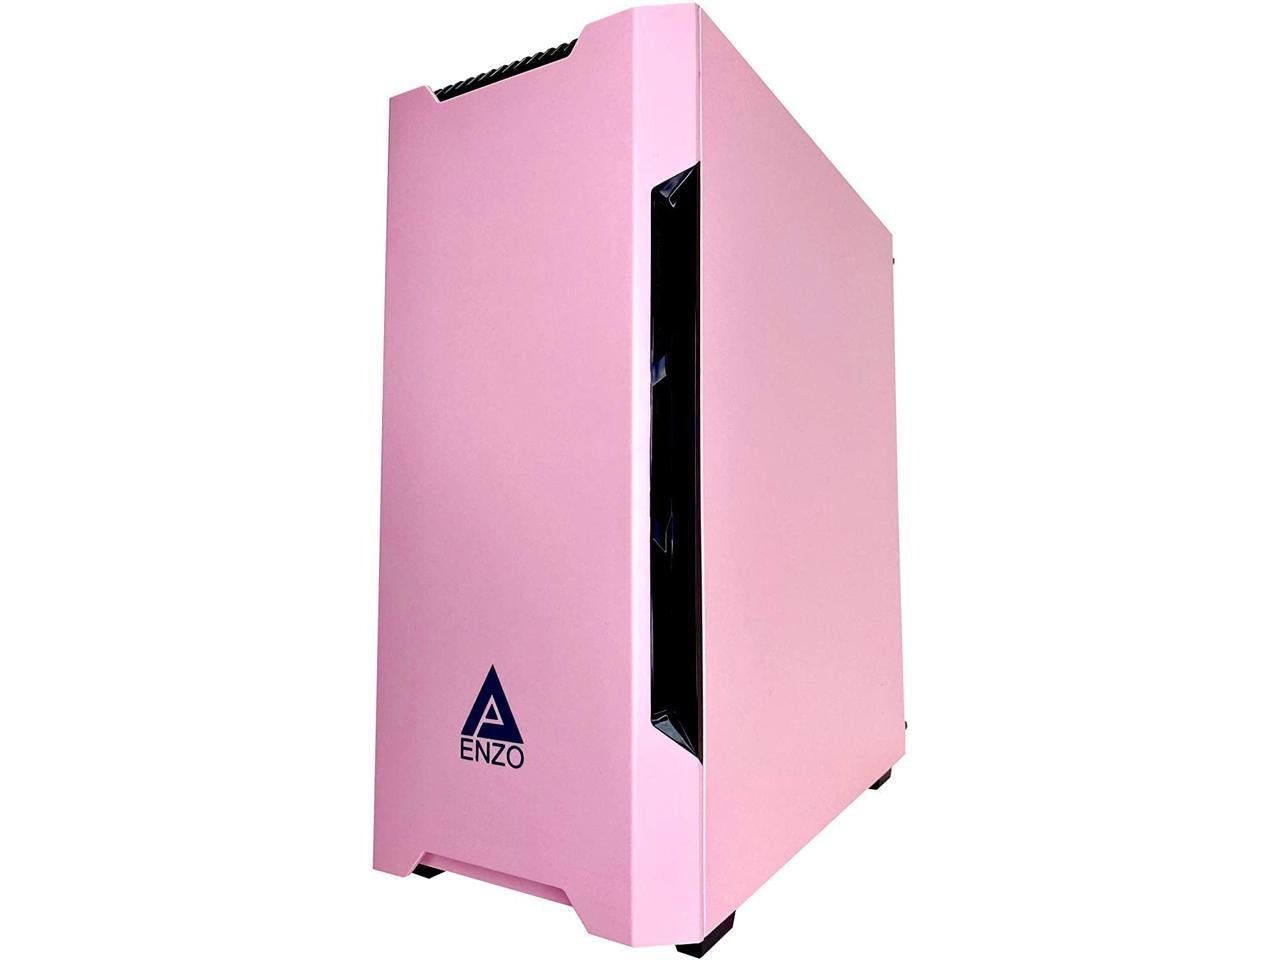 Apevia ENZO-PK Mid Tower Gaming Case with 1 x Tempered Glass Panel, Top USB3.0/USB2.0/Audio Ports, 1 x Black/White Fan, Pink Frame - Geek Tech